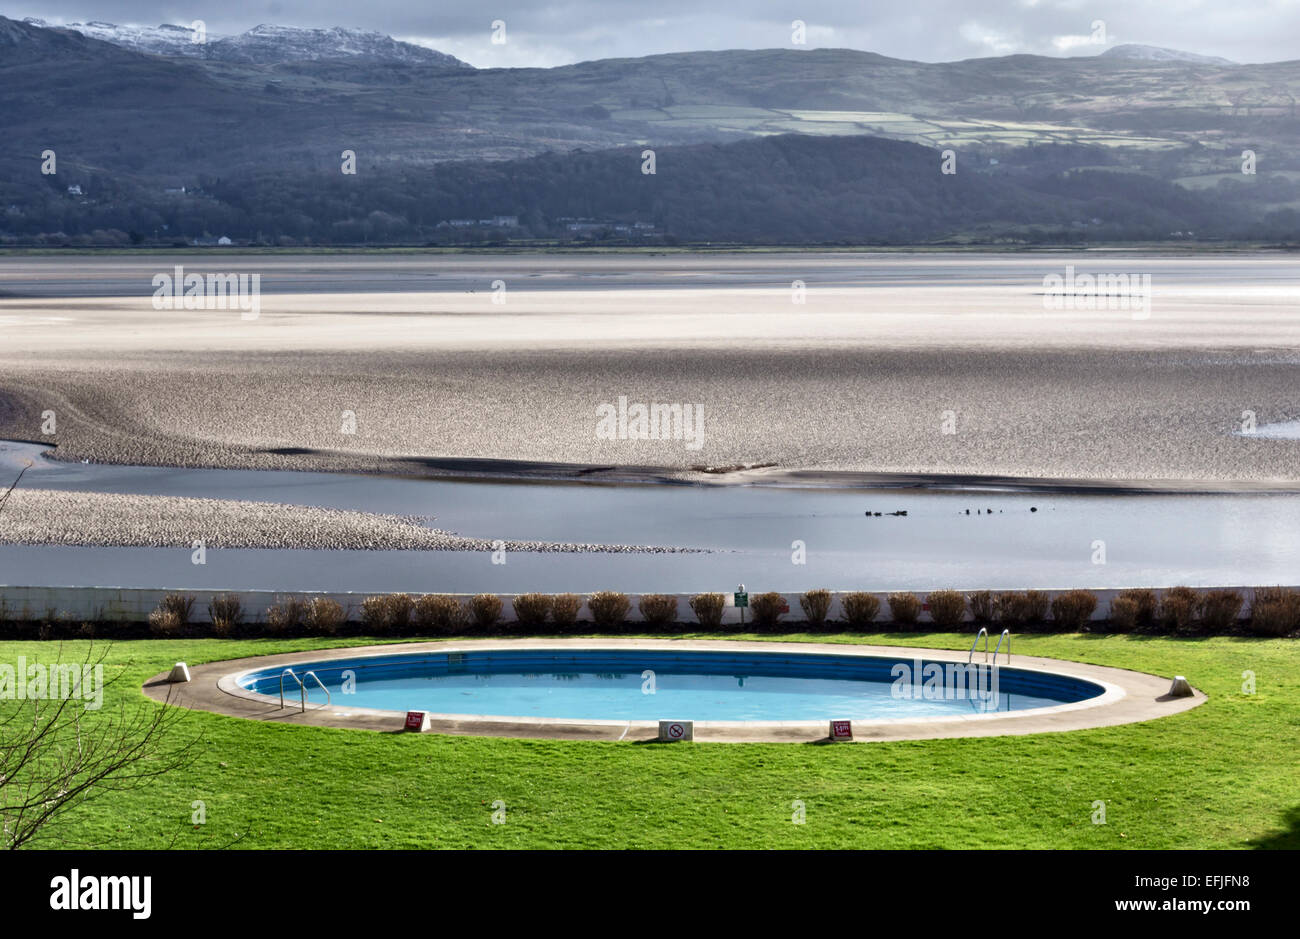 Portmeirion, North Wales, UK. The Portmeirion Hotel circular swimming pool overlooks the sands of the River Dwyryd estuary and the mountains beyond Stock Photo